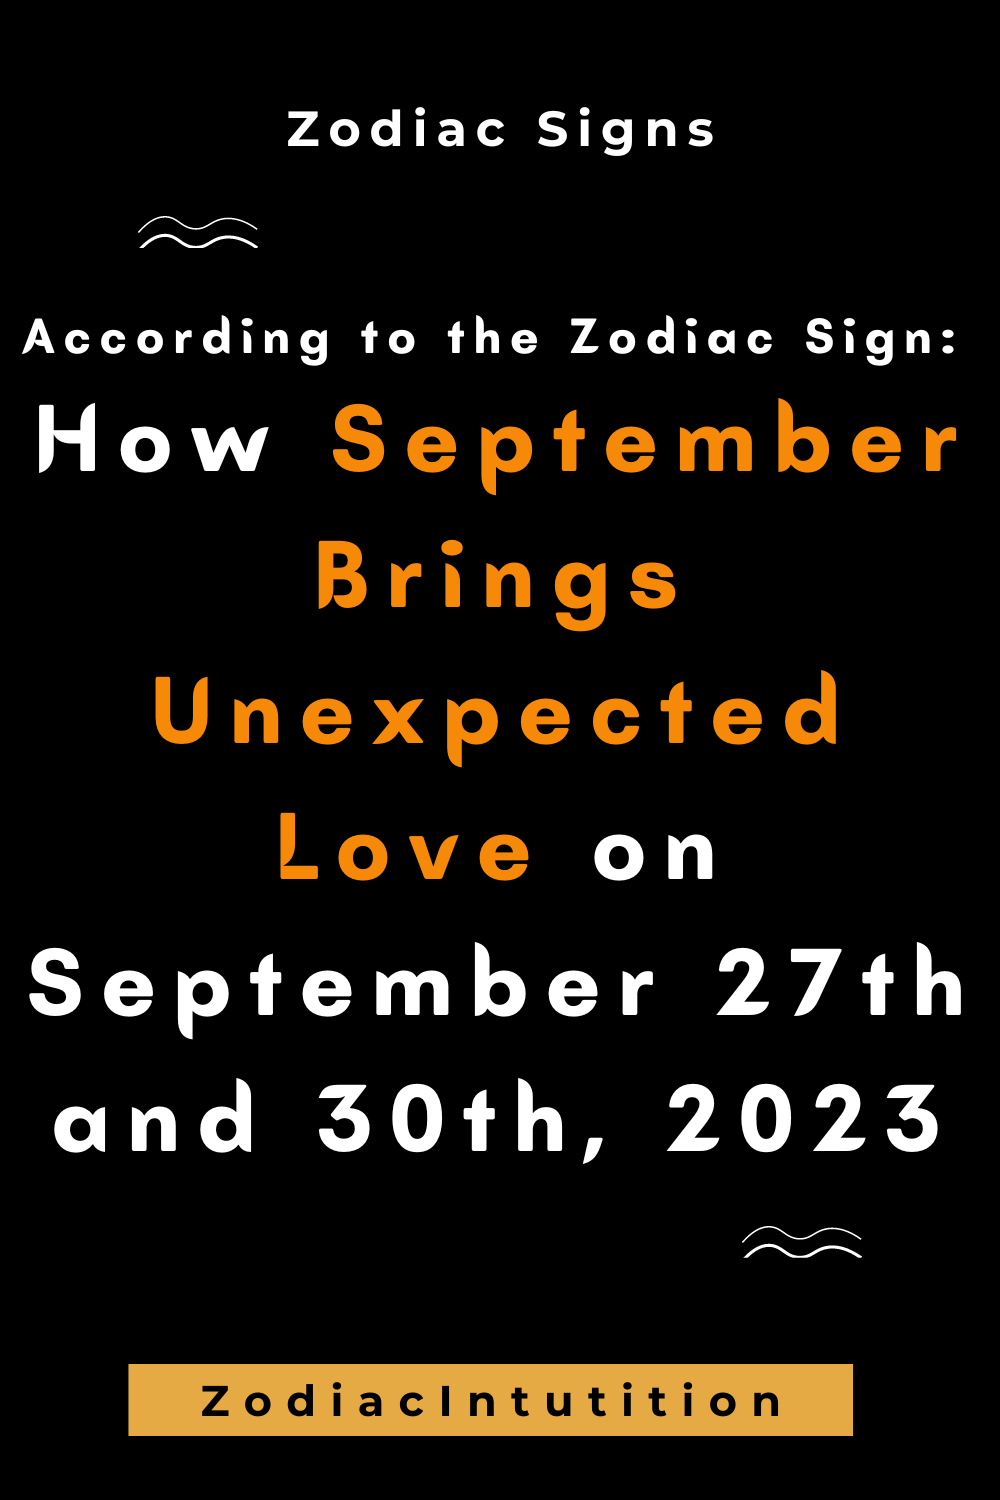 According to the Zodiac Sign: How September Brings Unexpected Love on September 27th and 30th, 2023